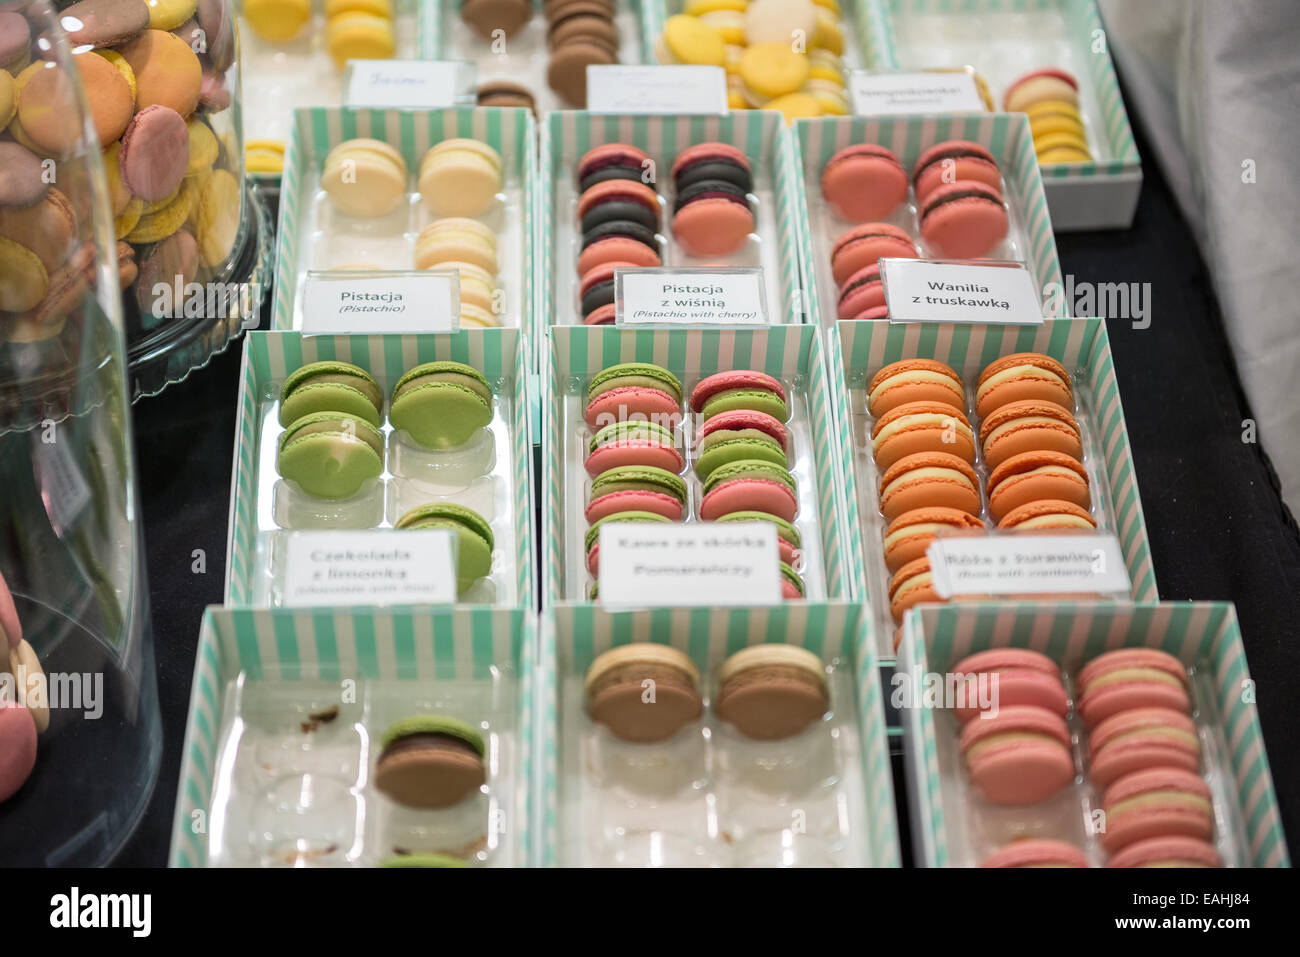 Warsaw, Poland. 15th November, 2014. Macaron - French sweet meringue-based confection displayed on a stand during the International Chocolate and Sweets Festival at the Palace of Culture and Science in Warsaw, Poland Credit:  kpzfoto/Alamy Live News Stock Photo